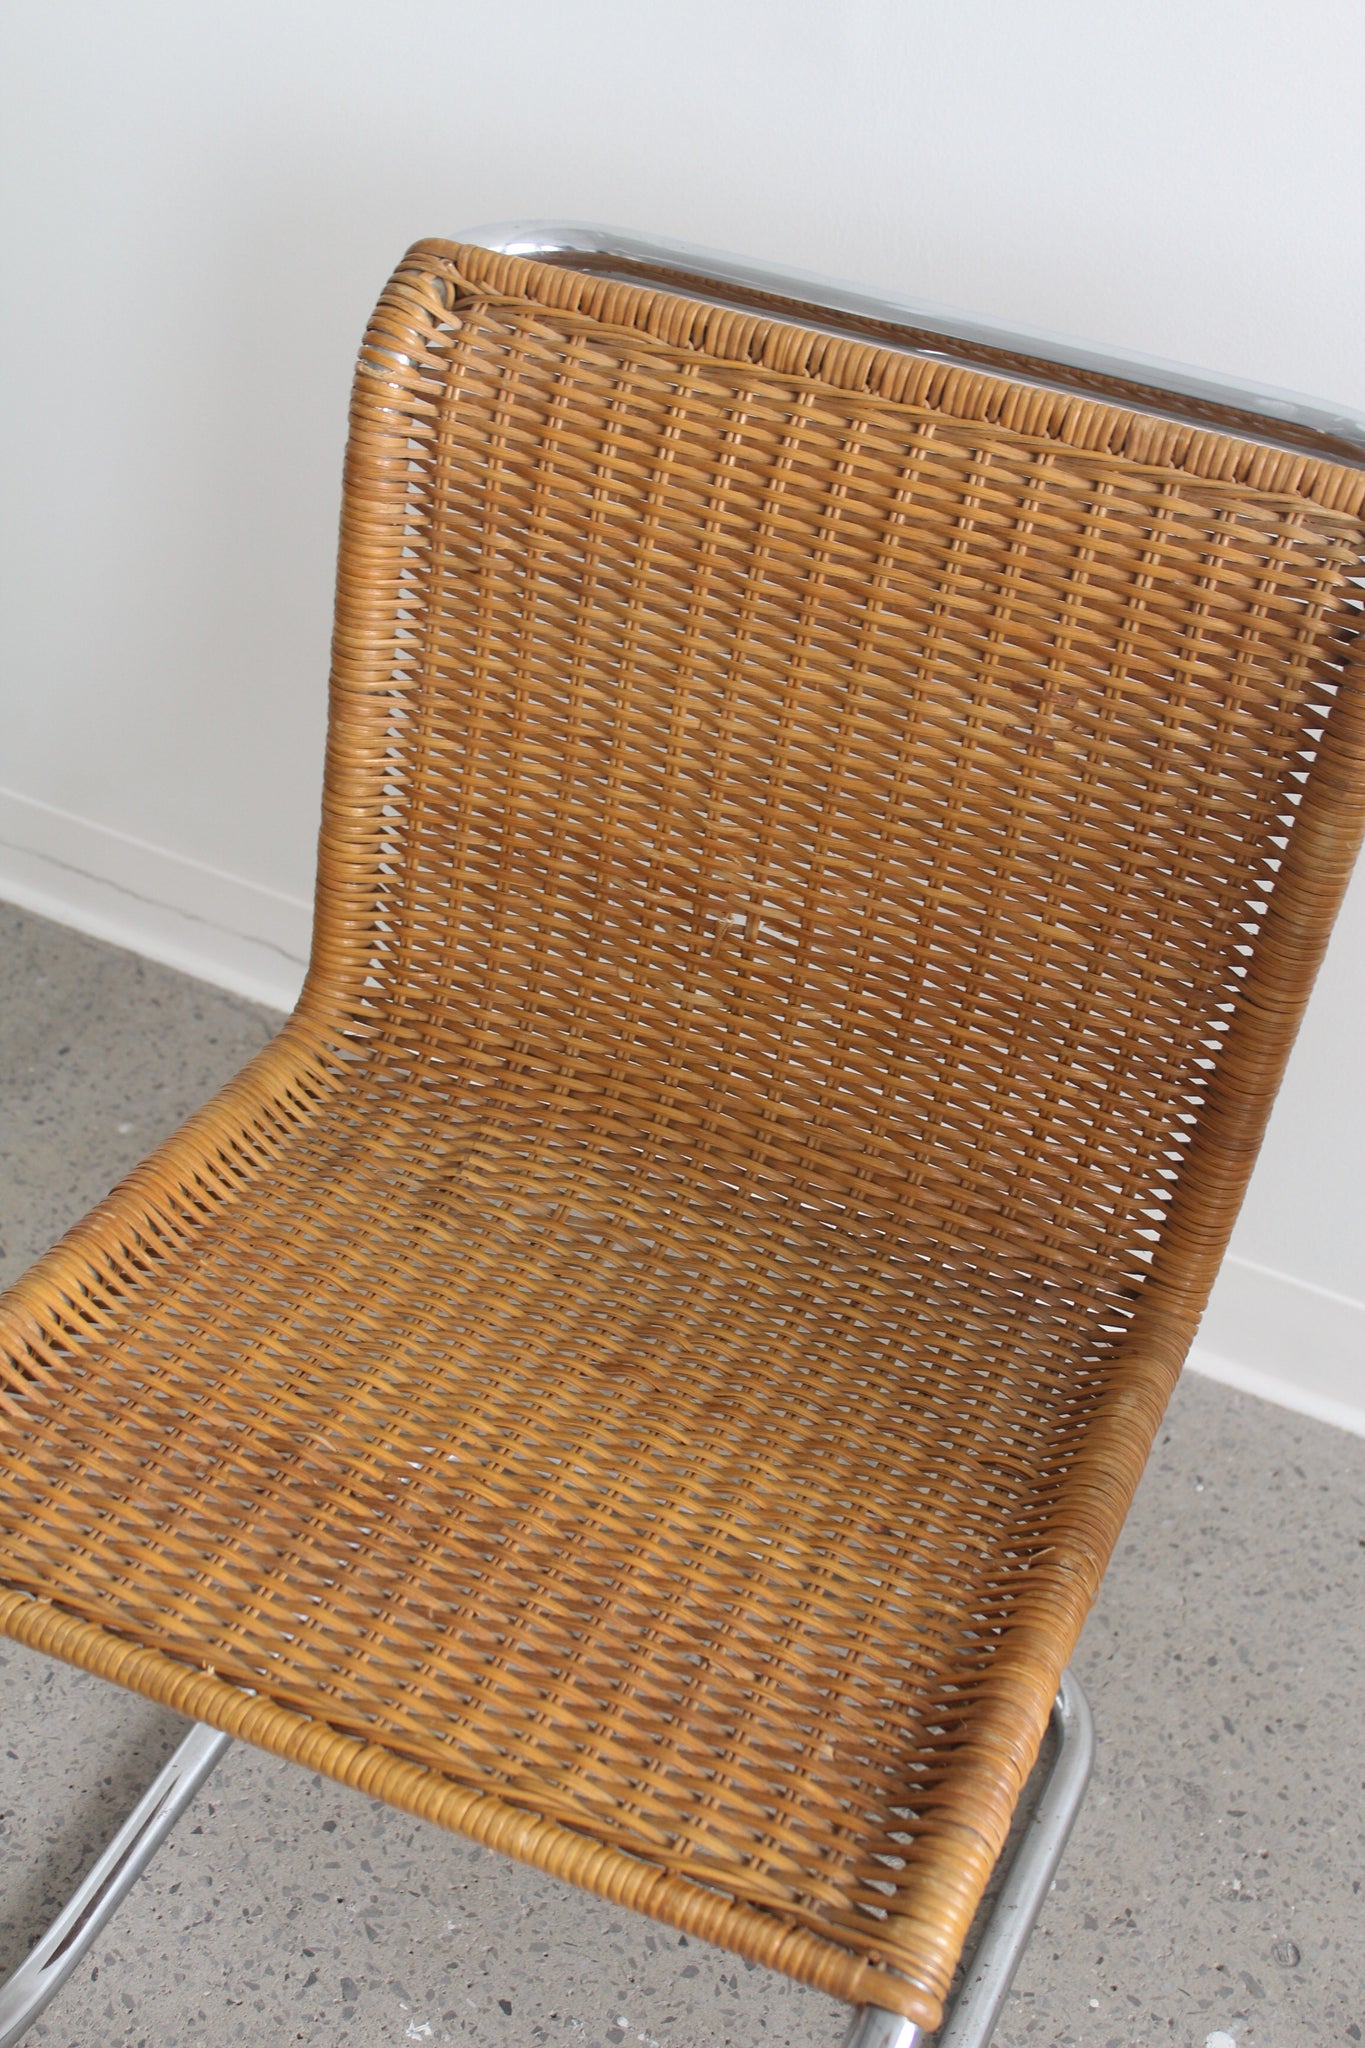 MR10 Woven Rattan Chairs by Mies Van Der Rohe